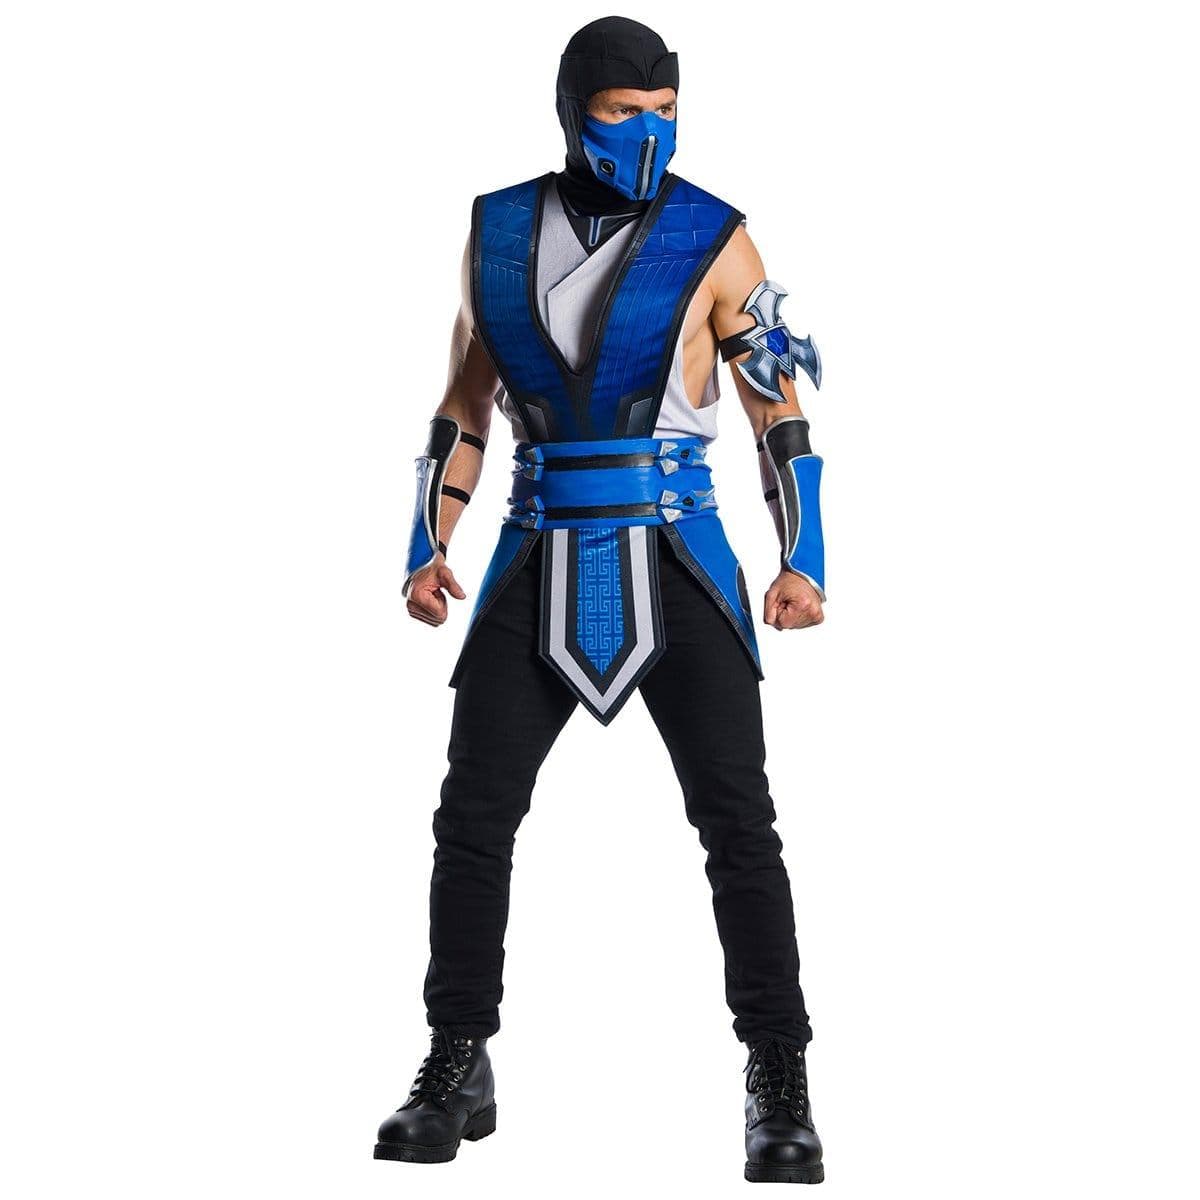 Buy Costumes Sub Zero Costume for Adults, Mortal Kombat sold at Party Expert